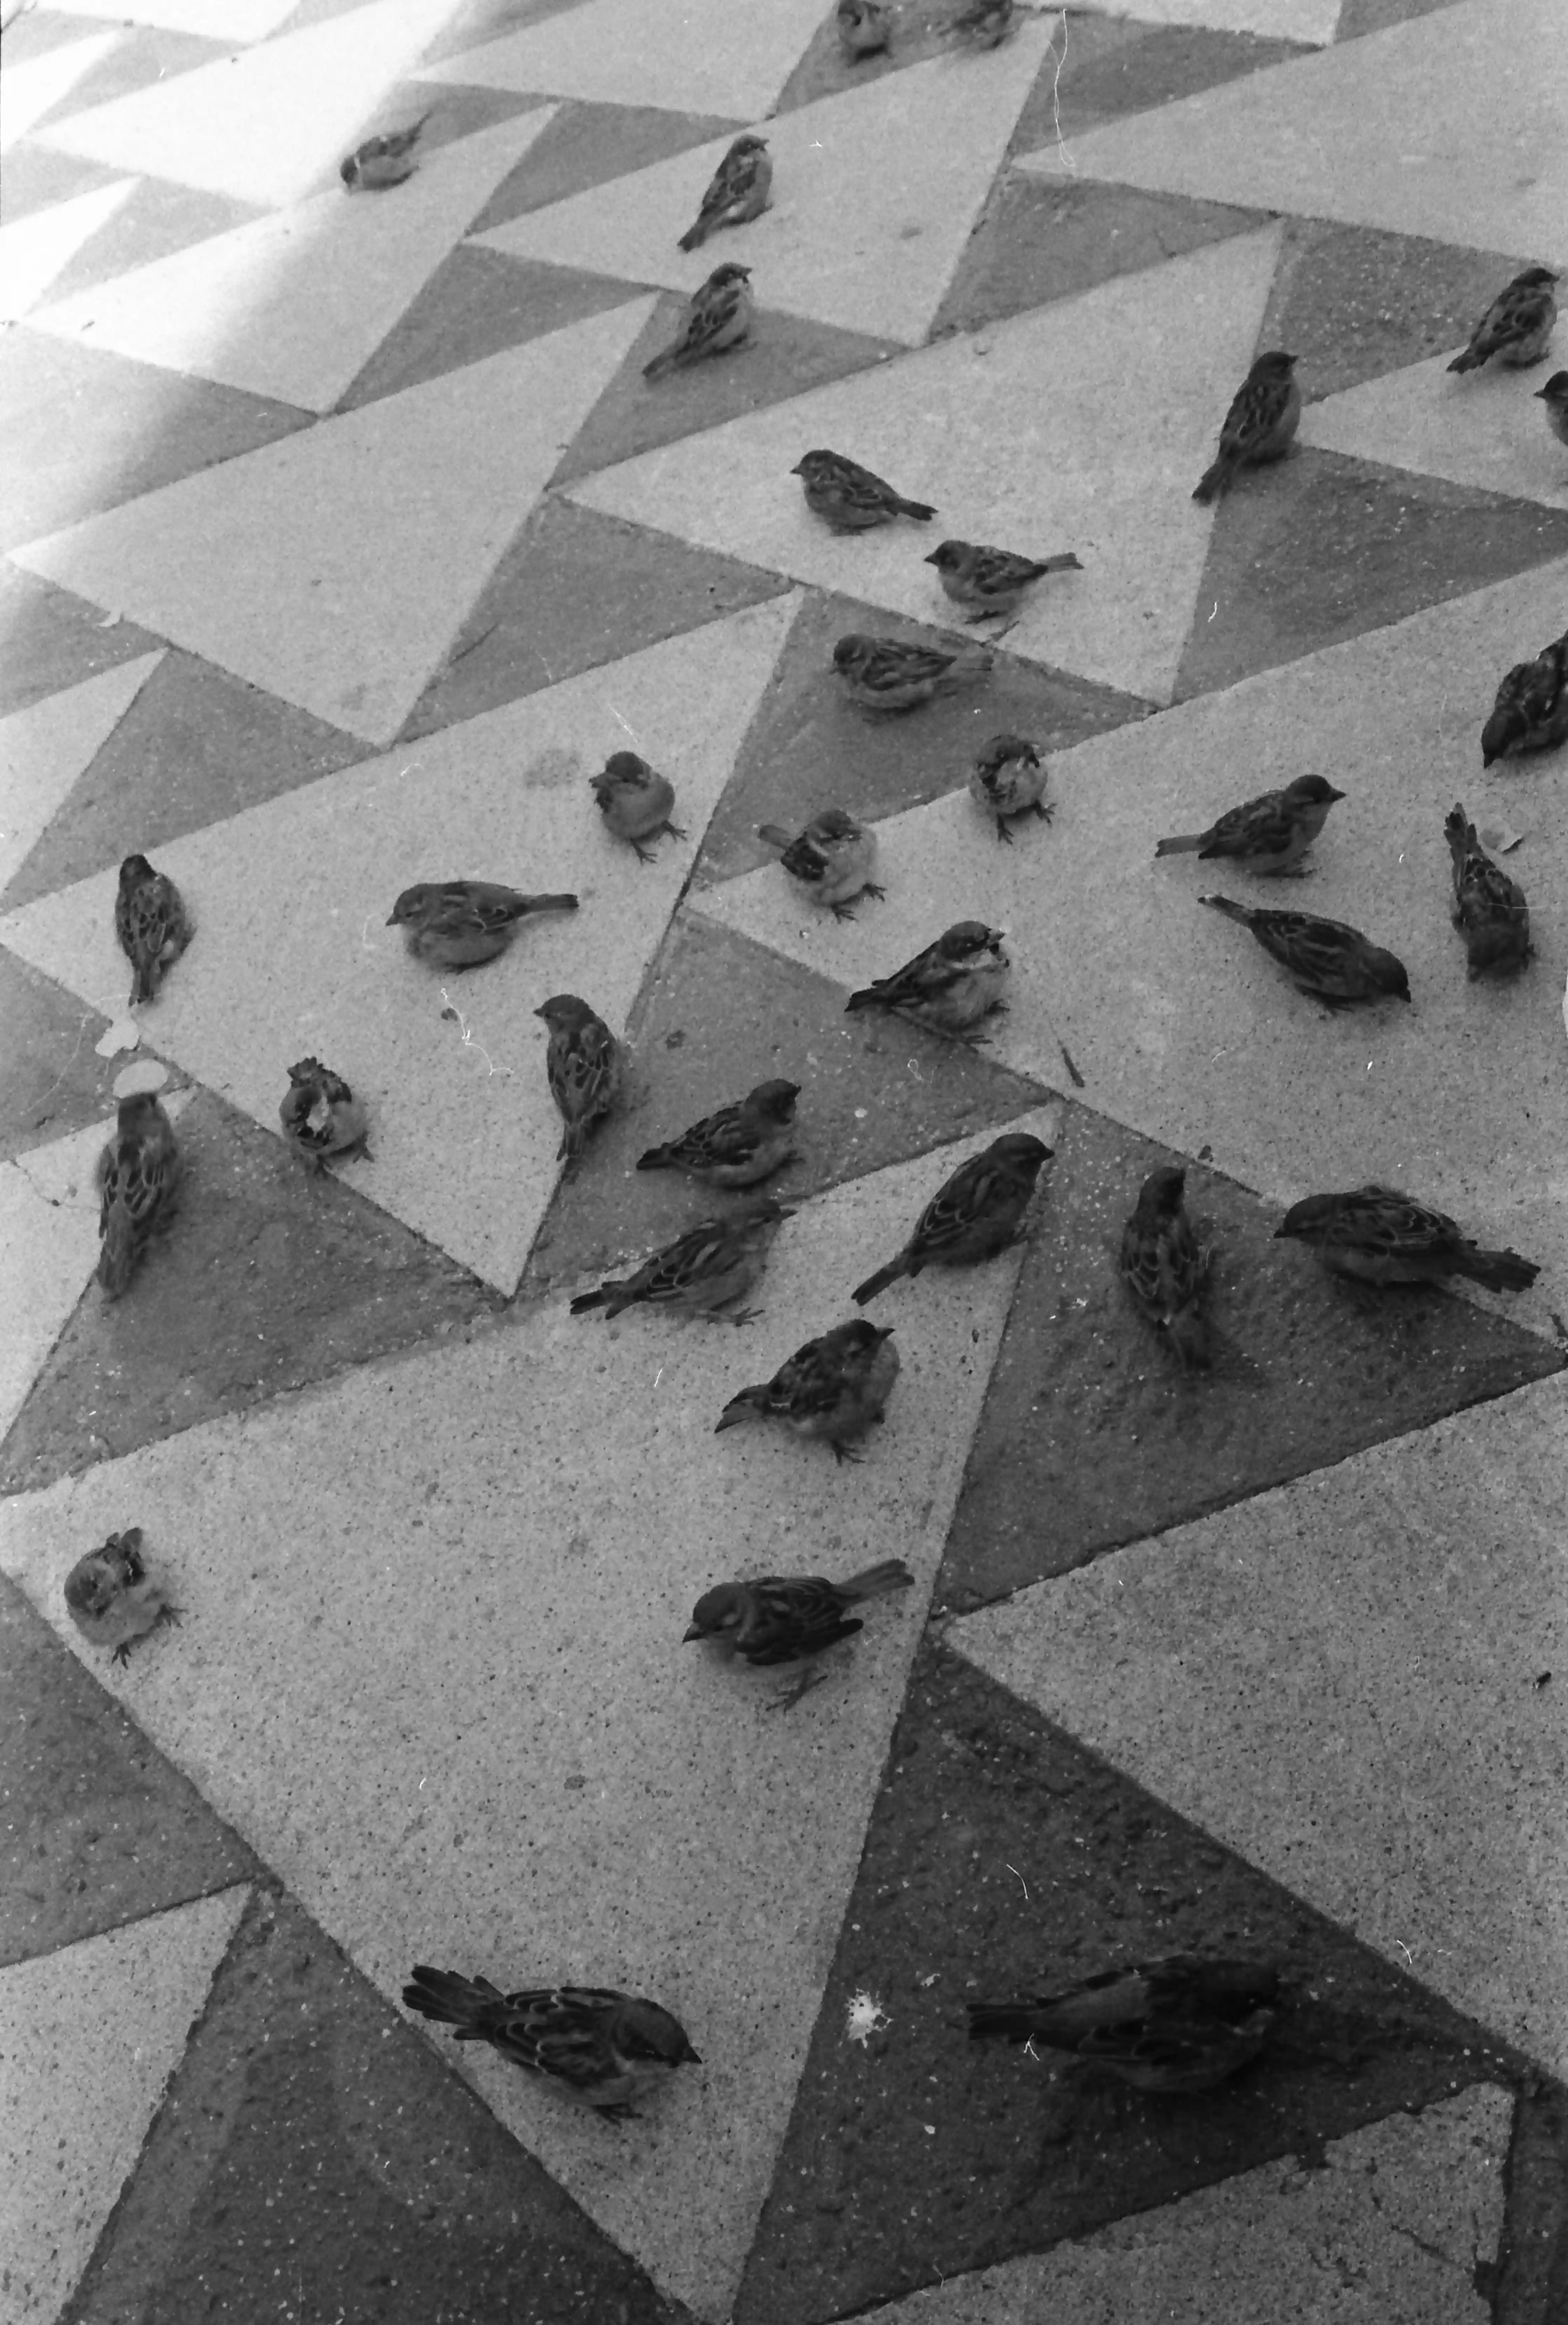 Black and white picture of a many birds on the ground